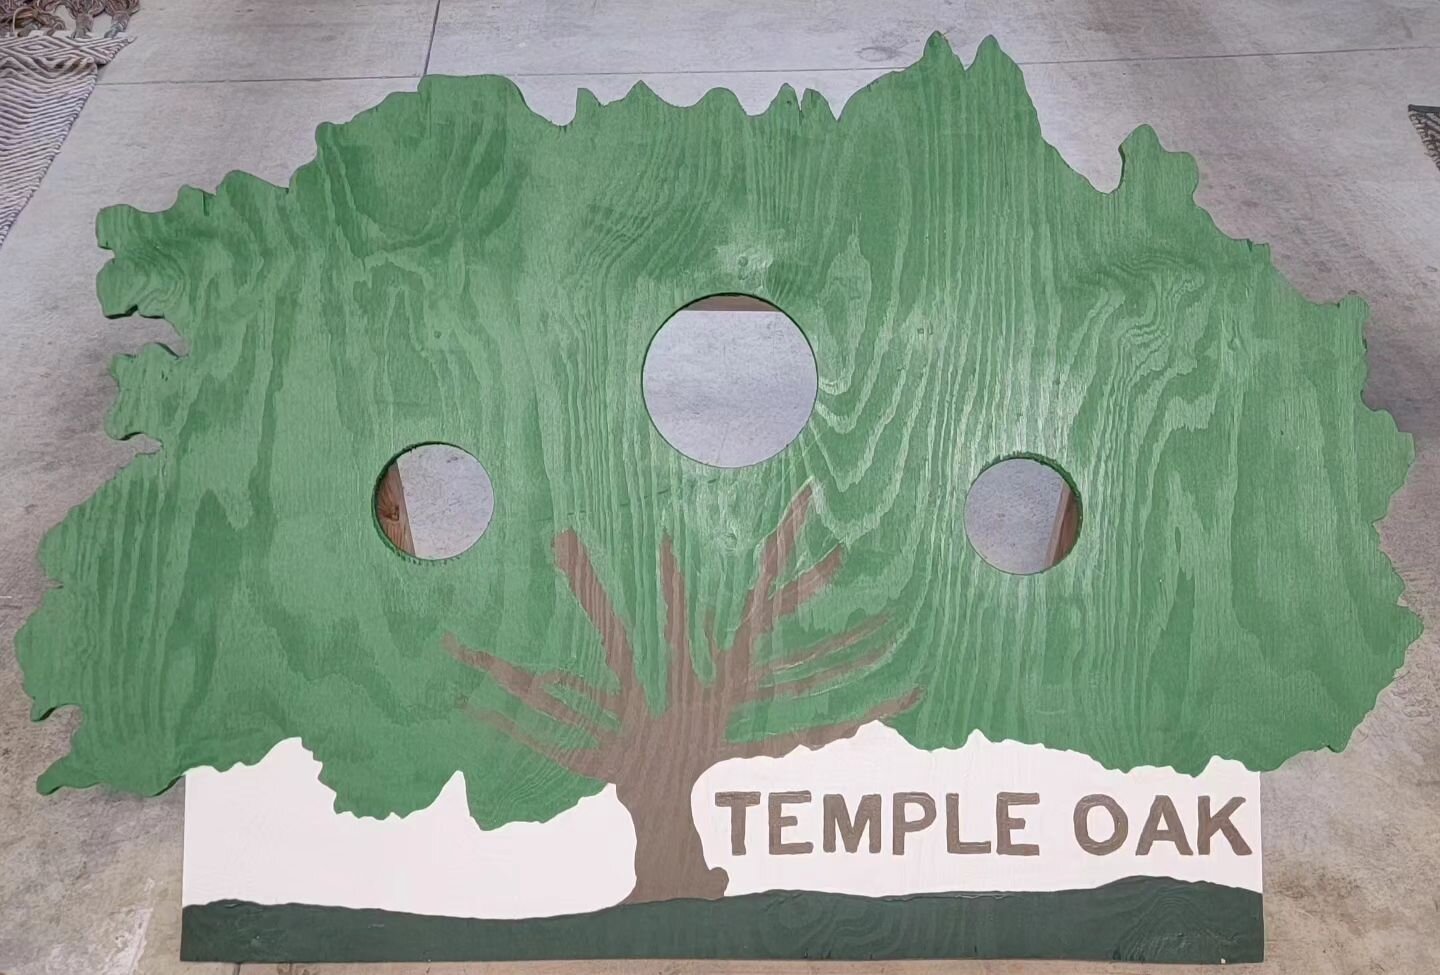 Temple Oak Toss is ready!
Come play at the Springdale booth at Feast of Lanterns this Saturday in Spades Park!